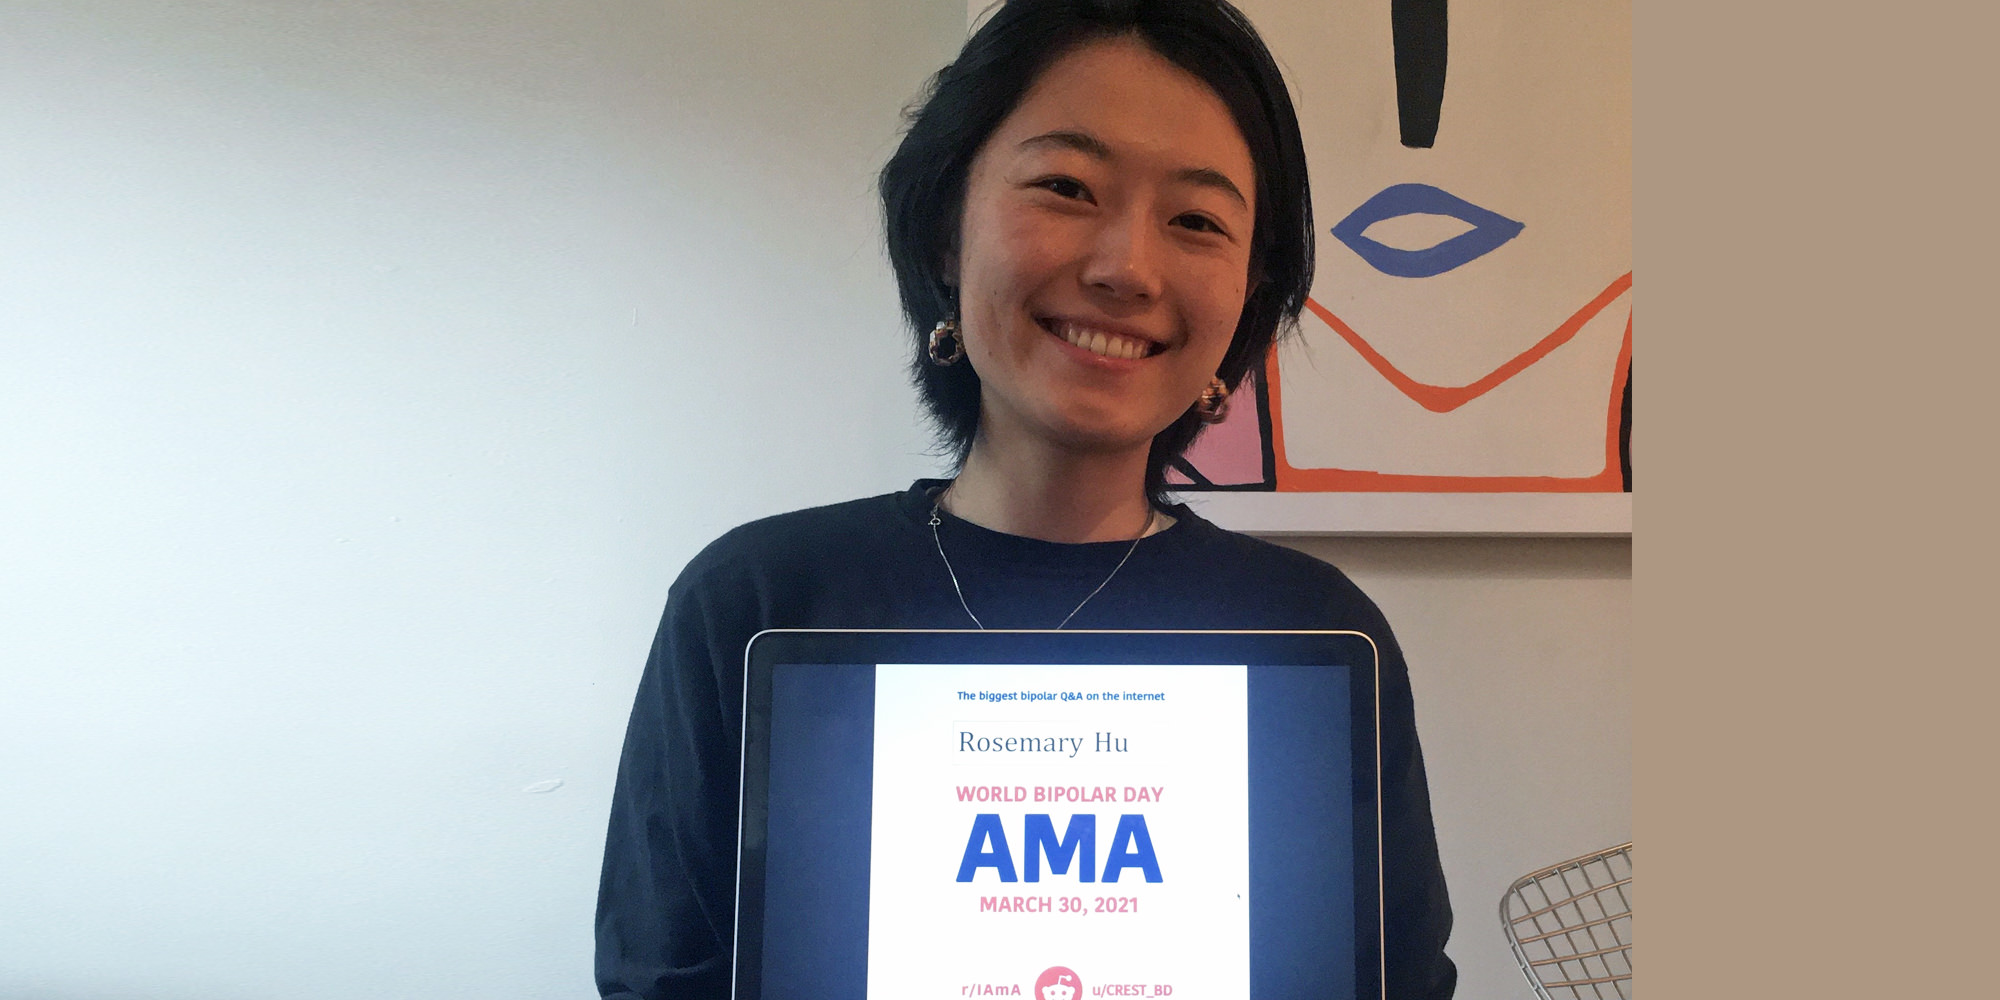 Rosemary is standing in front of a minimalist, modern painting of a woman's face. She is Chinese Canadian and is holding an iPad or laptop screen with the AMA proof and her typed name up on the screen. She has short black hair, gold earrings, and is wearing a lightweight dark sweater.